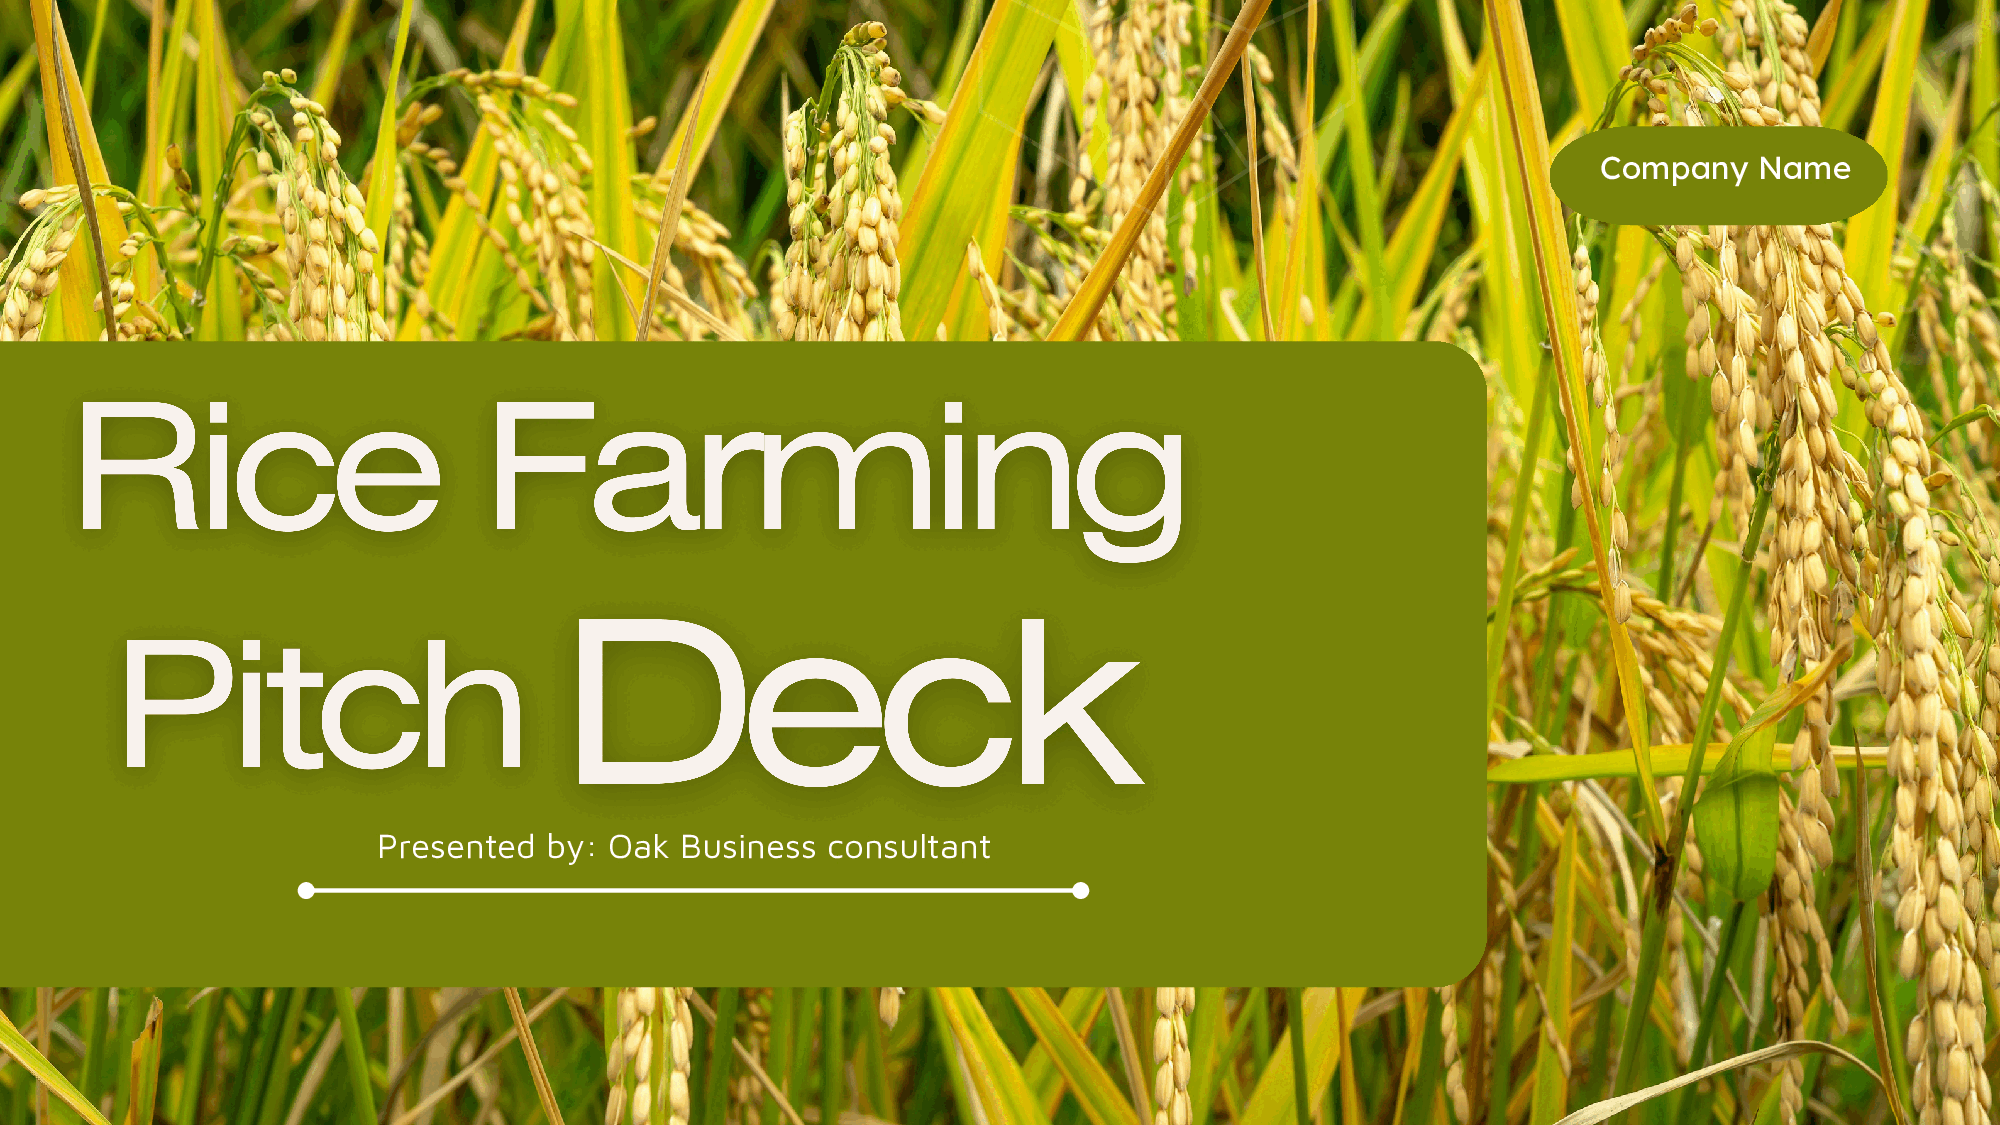 Rice Farming Pitch Deck Template